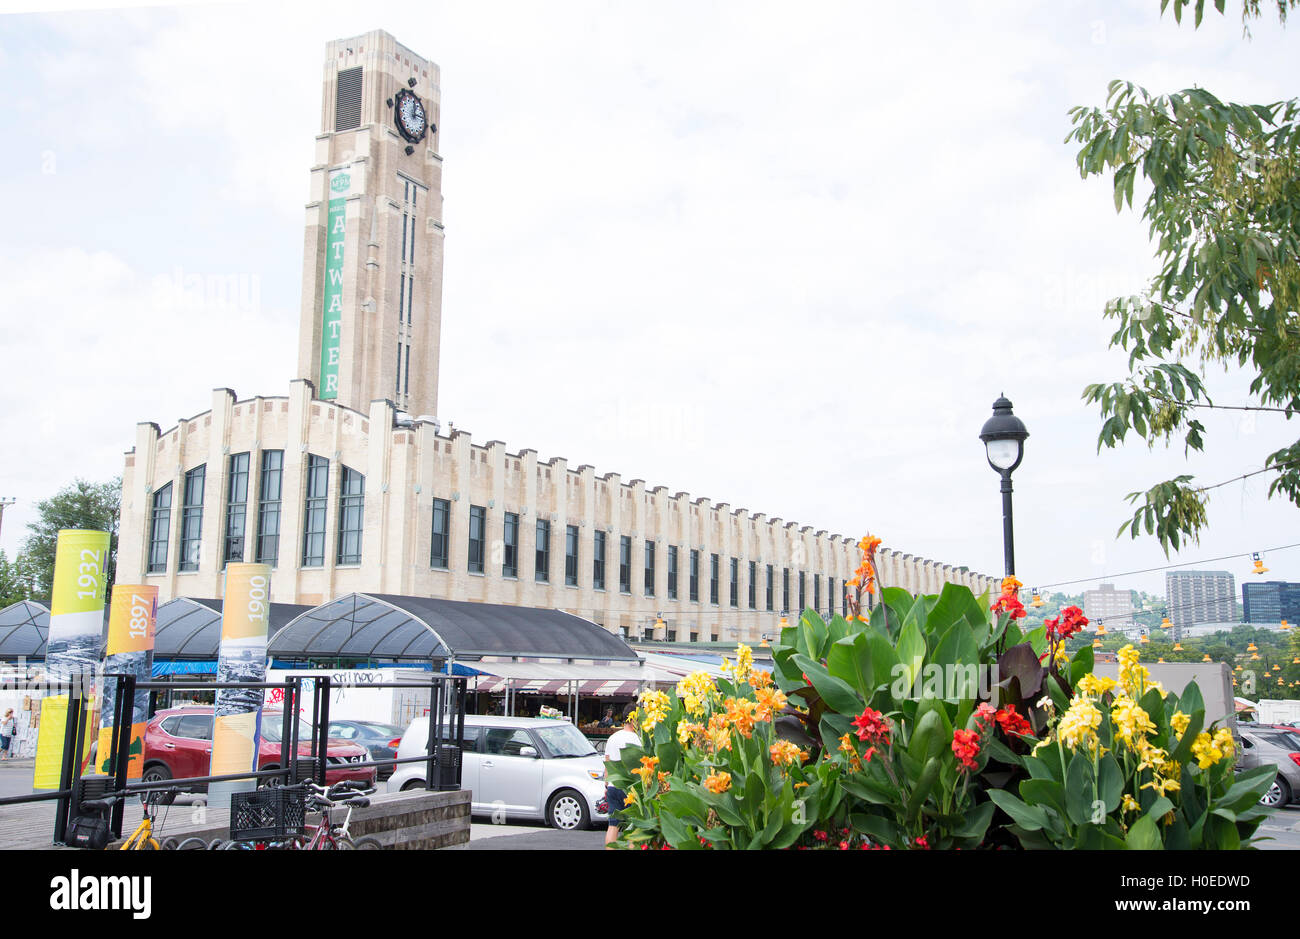 Atwater Market's Tower, public Farmers Market located near the Lachine Canal, Montreal, Canada Stock Photo